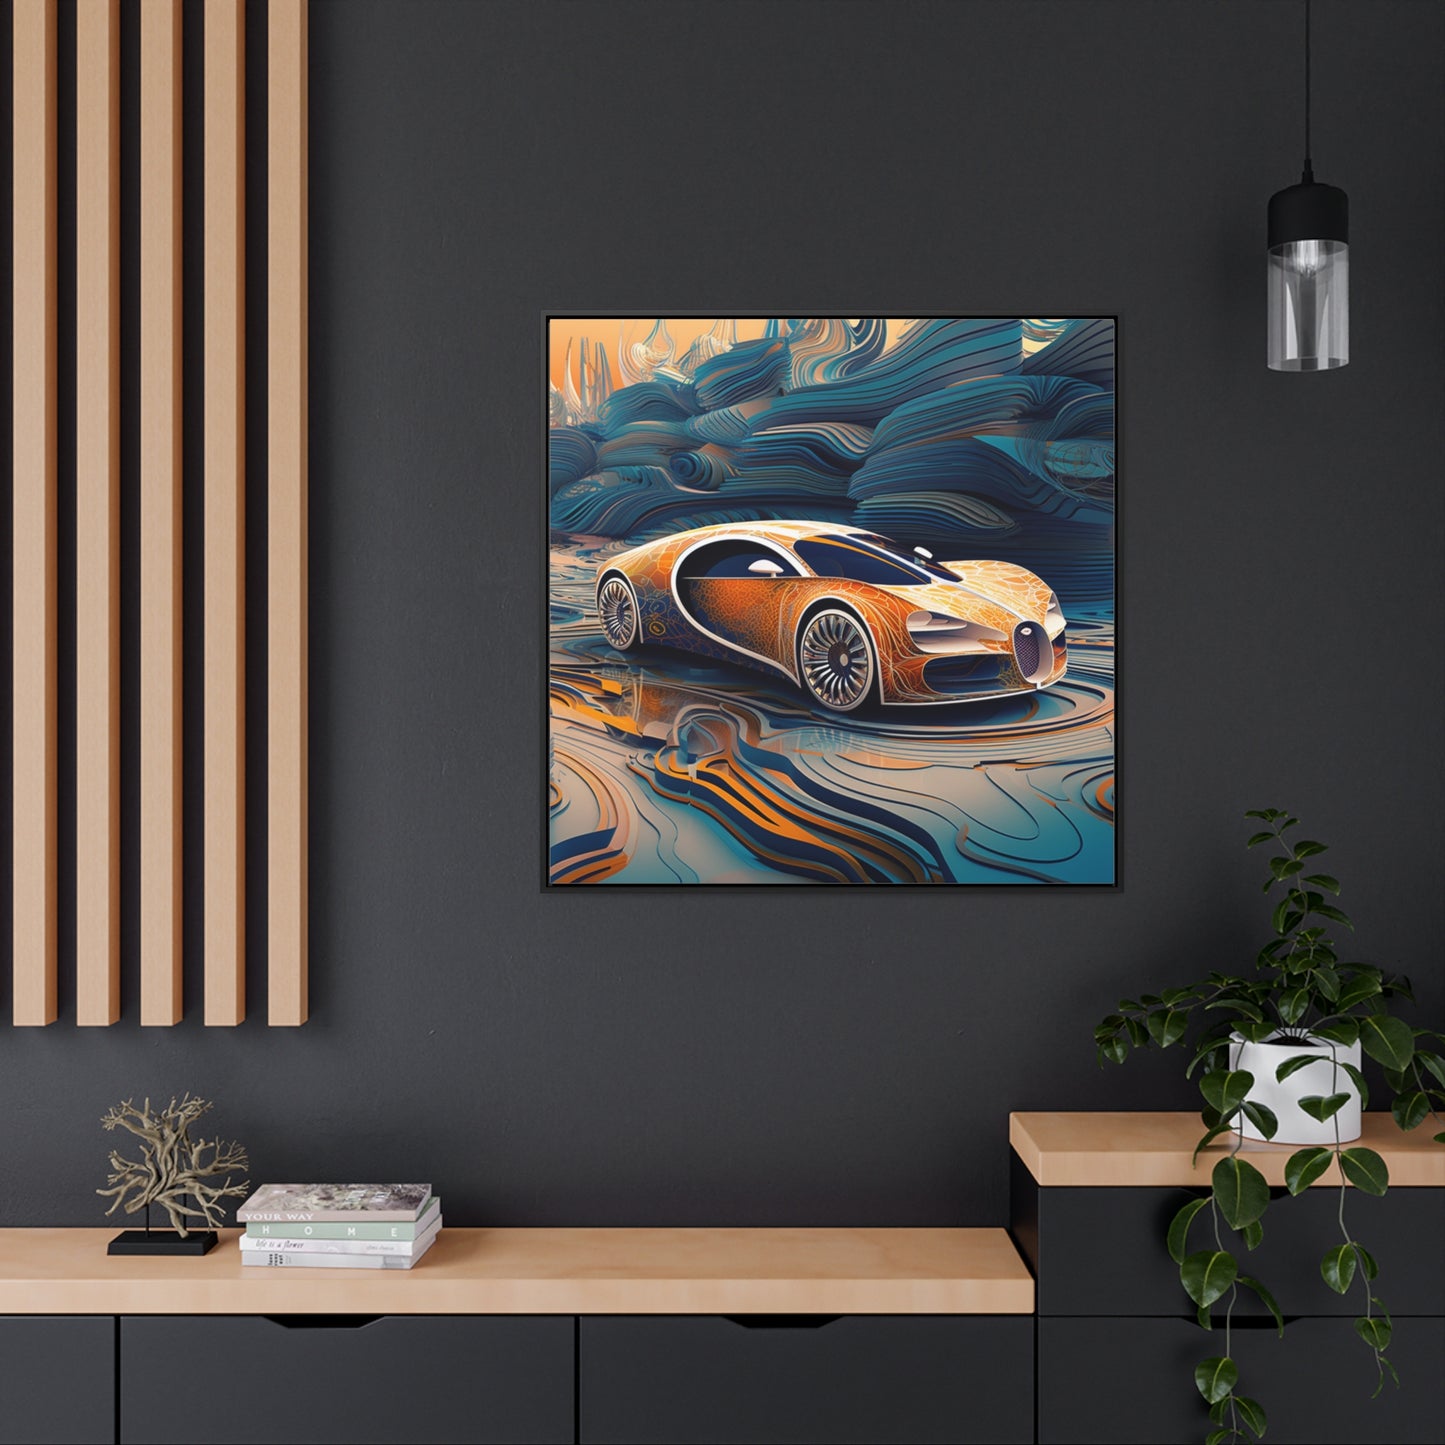 Gallery Canvas Wraps, Square Frame Bugatti Abstract Flair 1